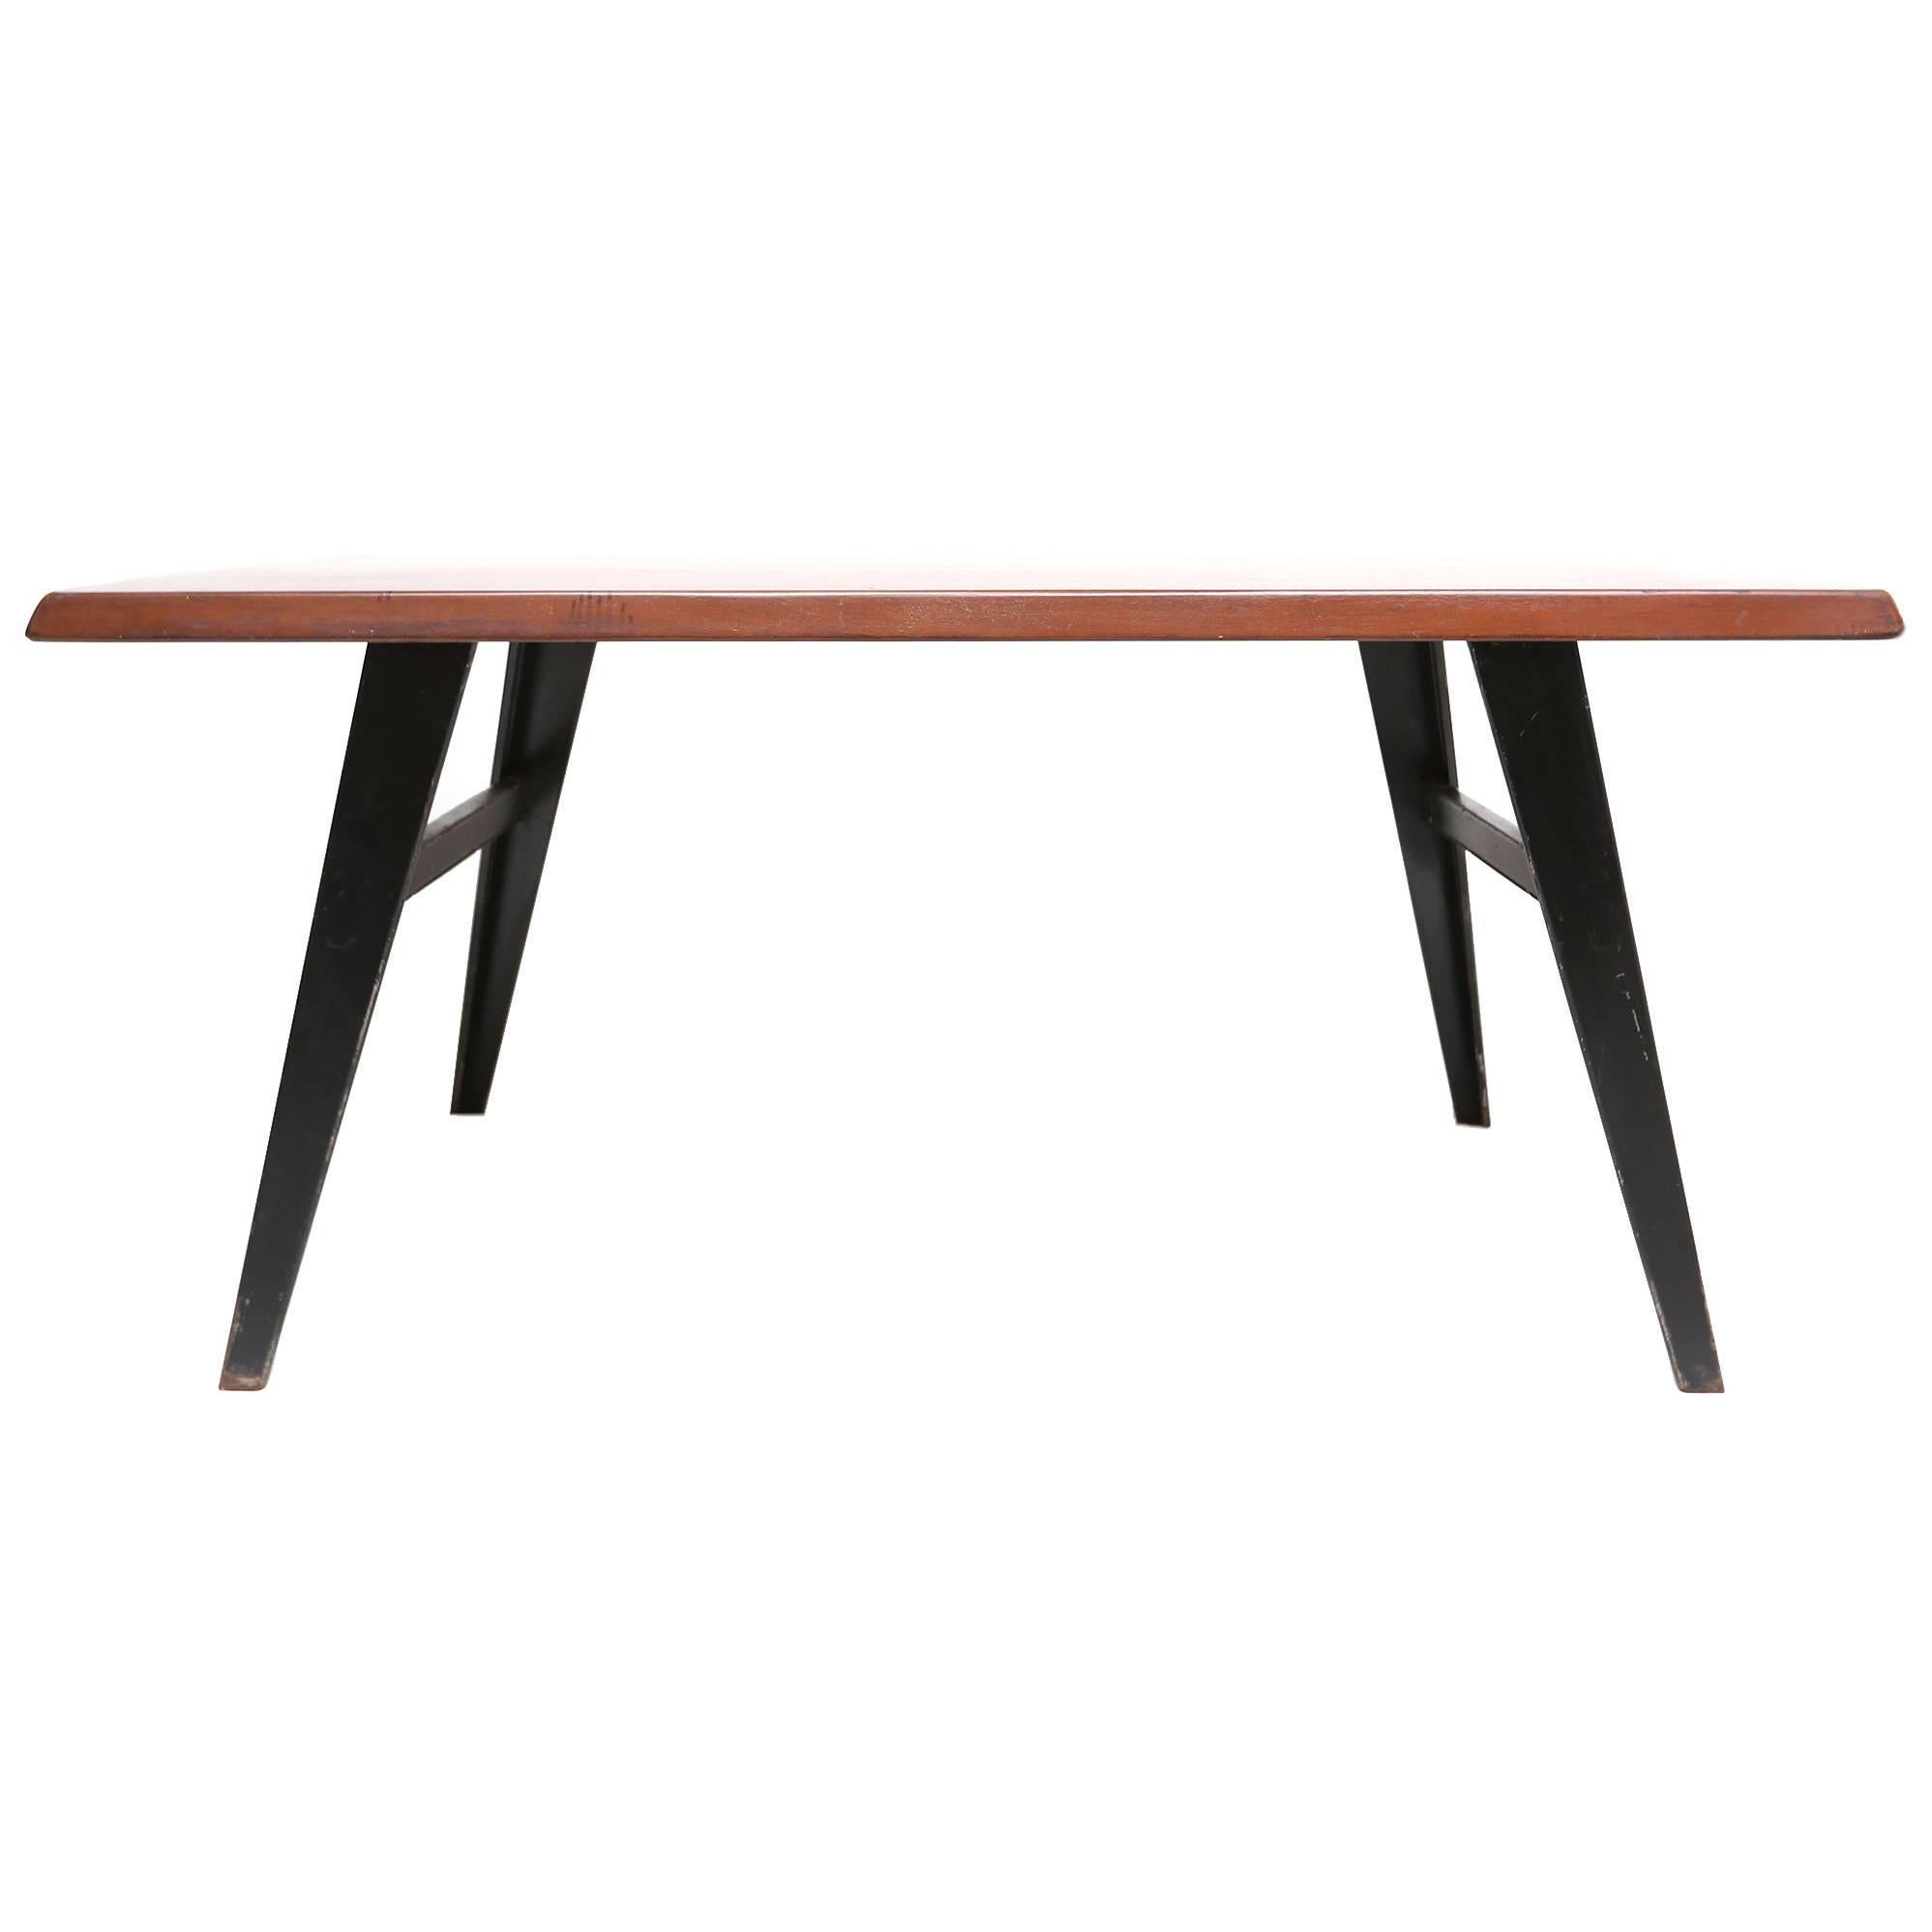 Jean Prouvé style Mid-Century modern French Dining Table in elm